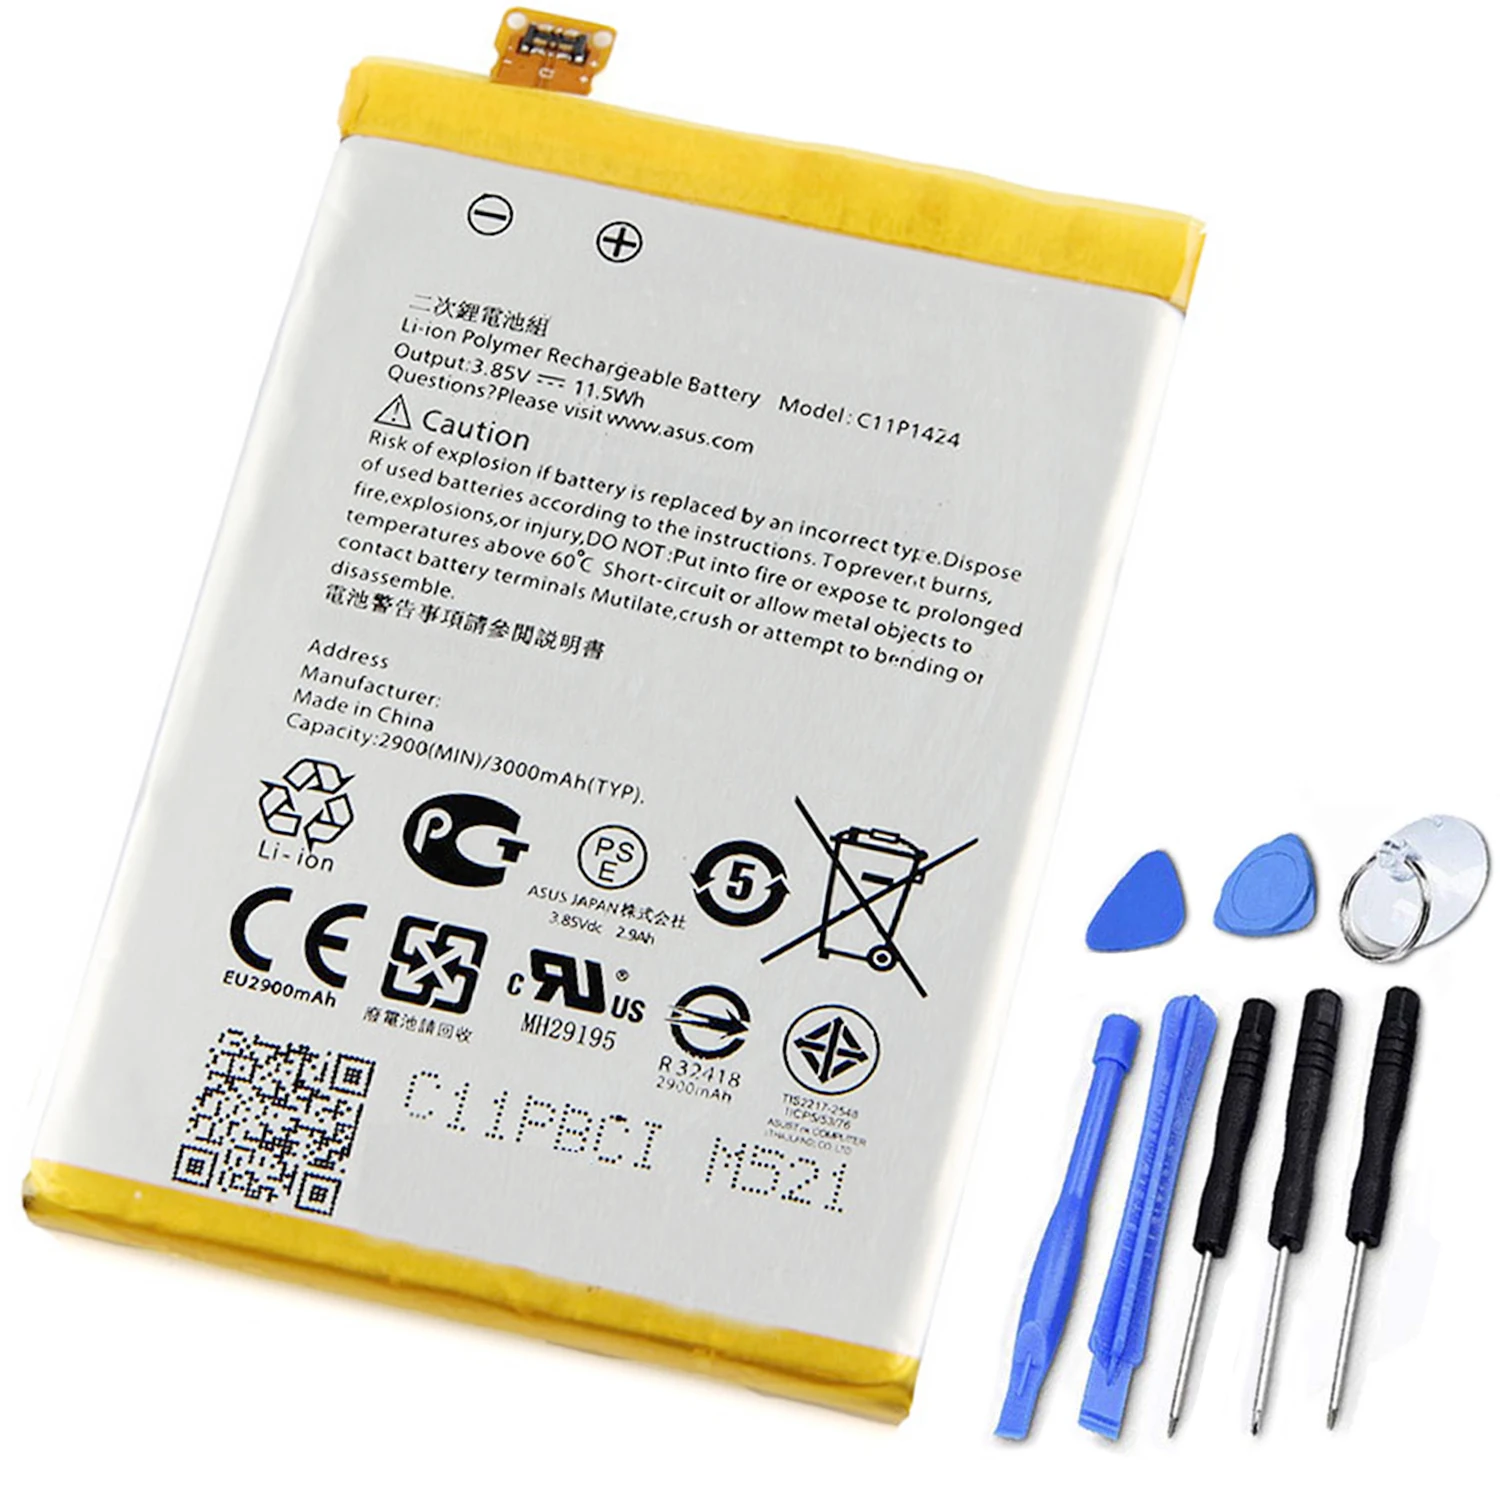 Original 3 85v 11 5wh 3000mah C11p1424 Laptop Battery For Asus Zenfone 2 Z008d Ze551ml Ze550ml Z00ad Buy C11p1424 Z00ad For Asus Zenfone 2 Product On Alibaba Com